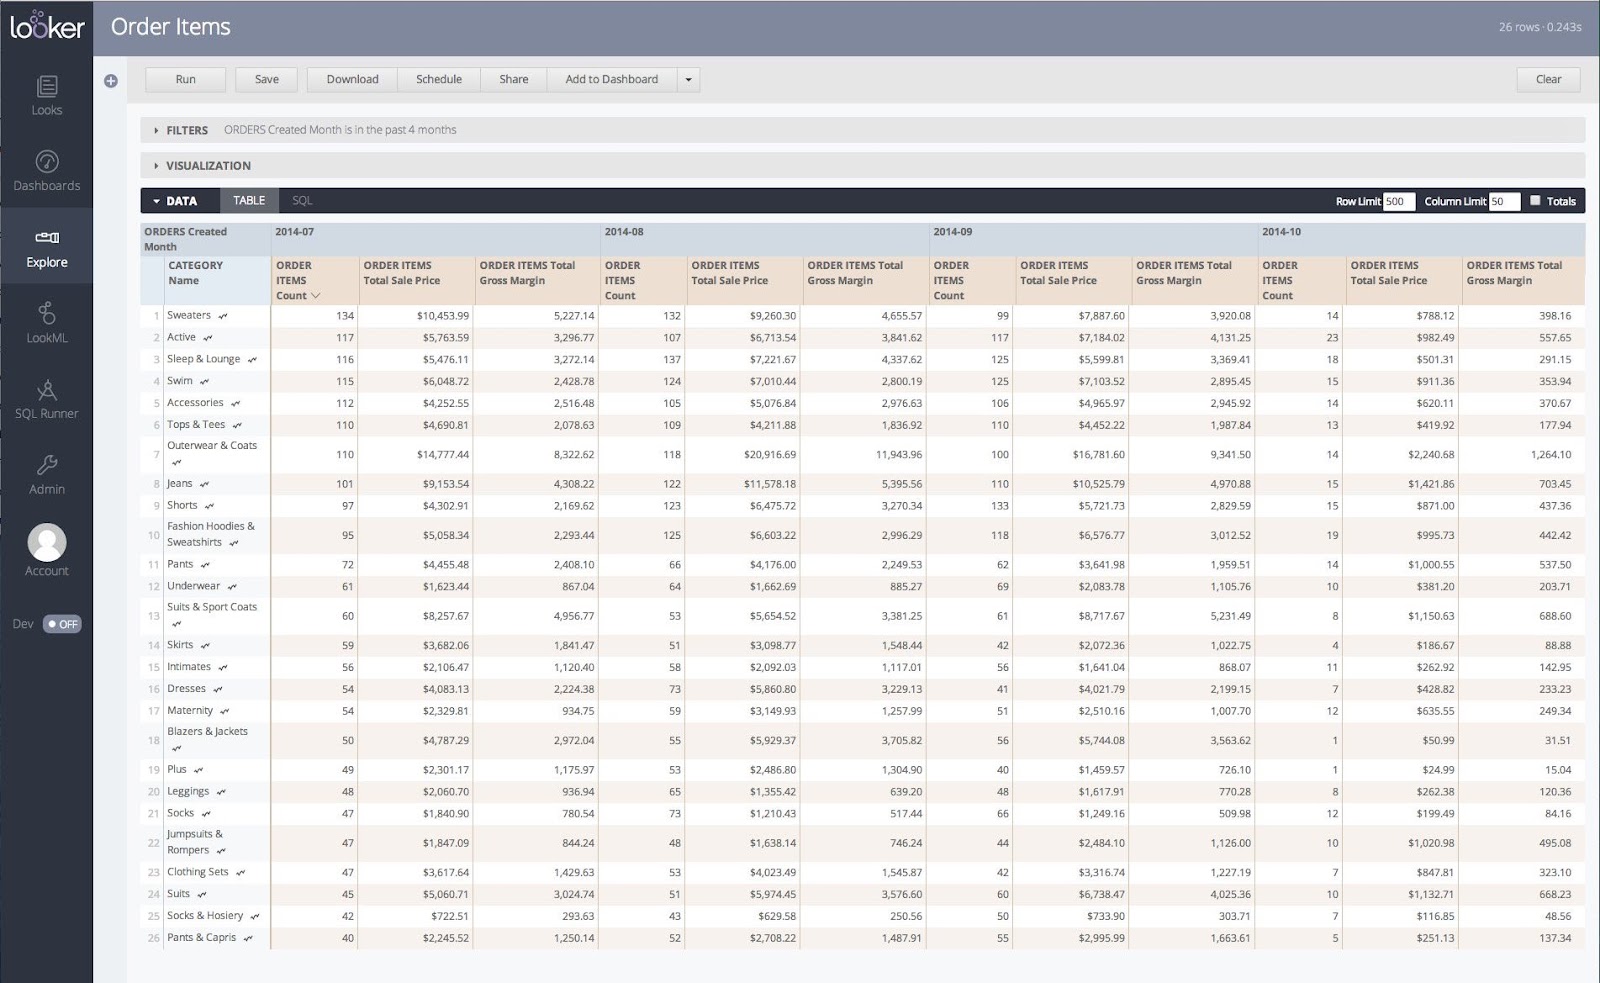 The analytics dashboard on "Looker" with a table showing sales data for different product categories.